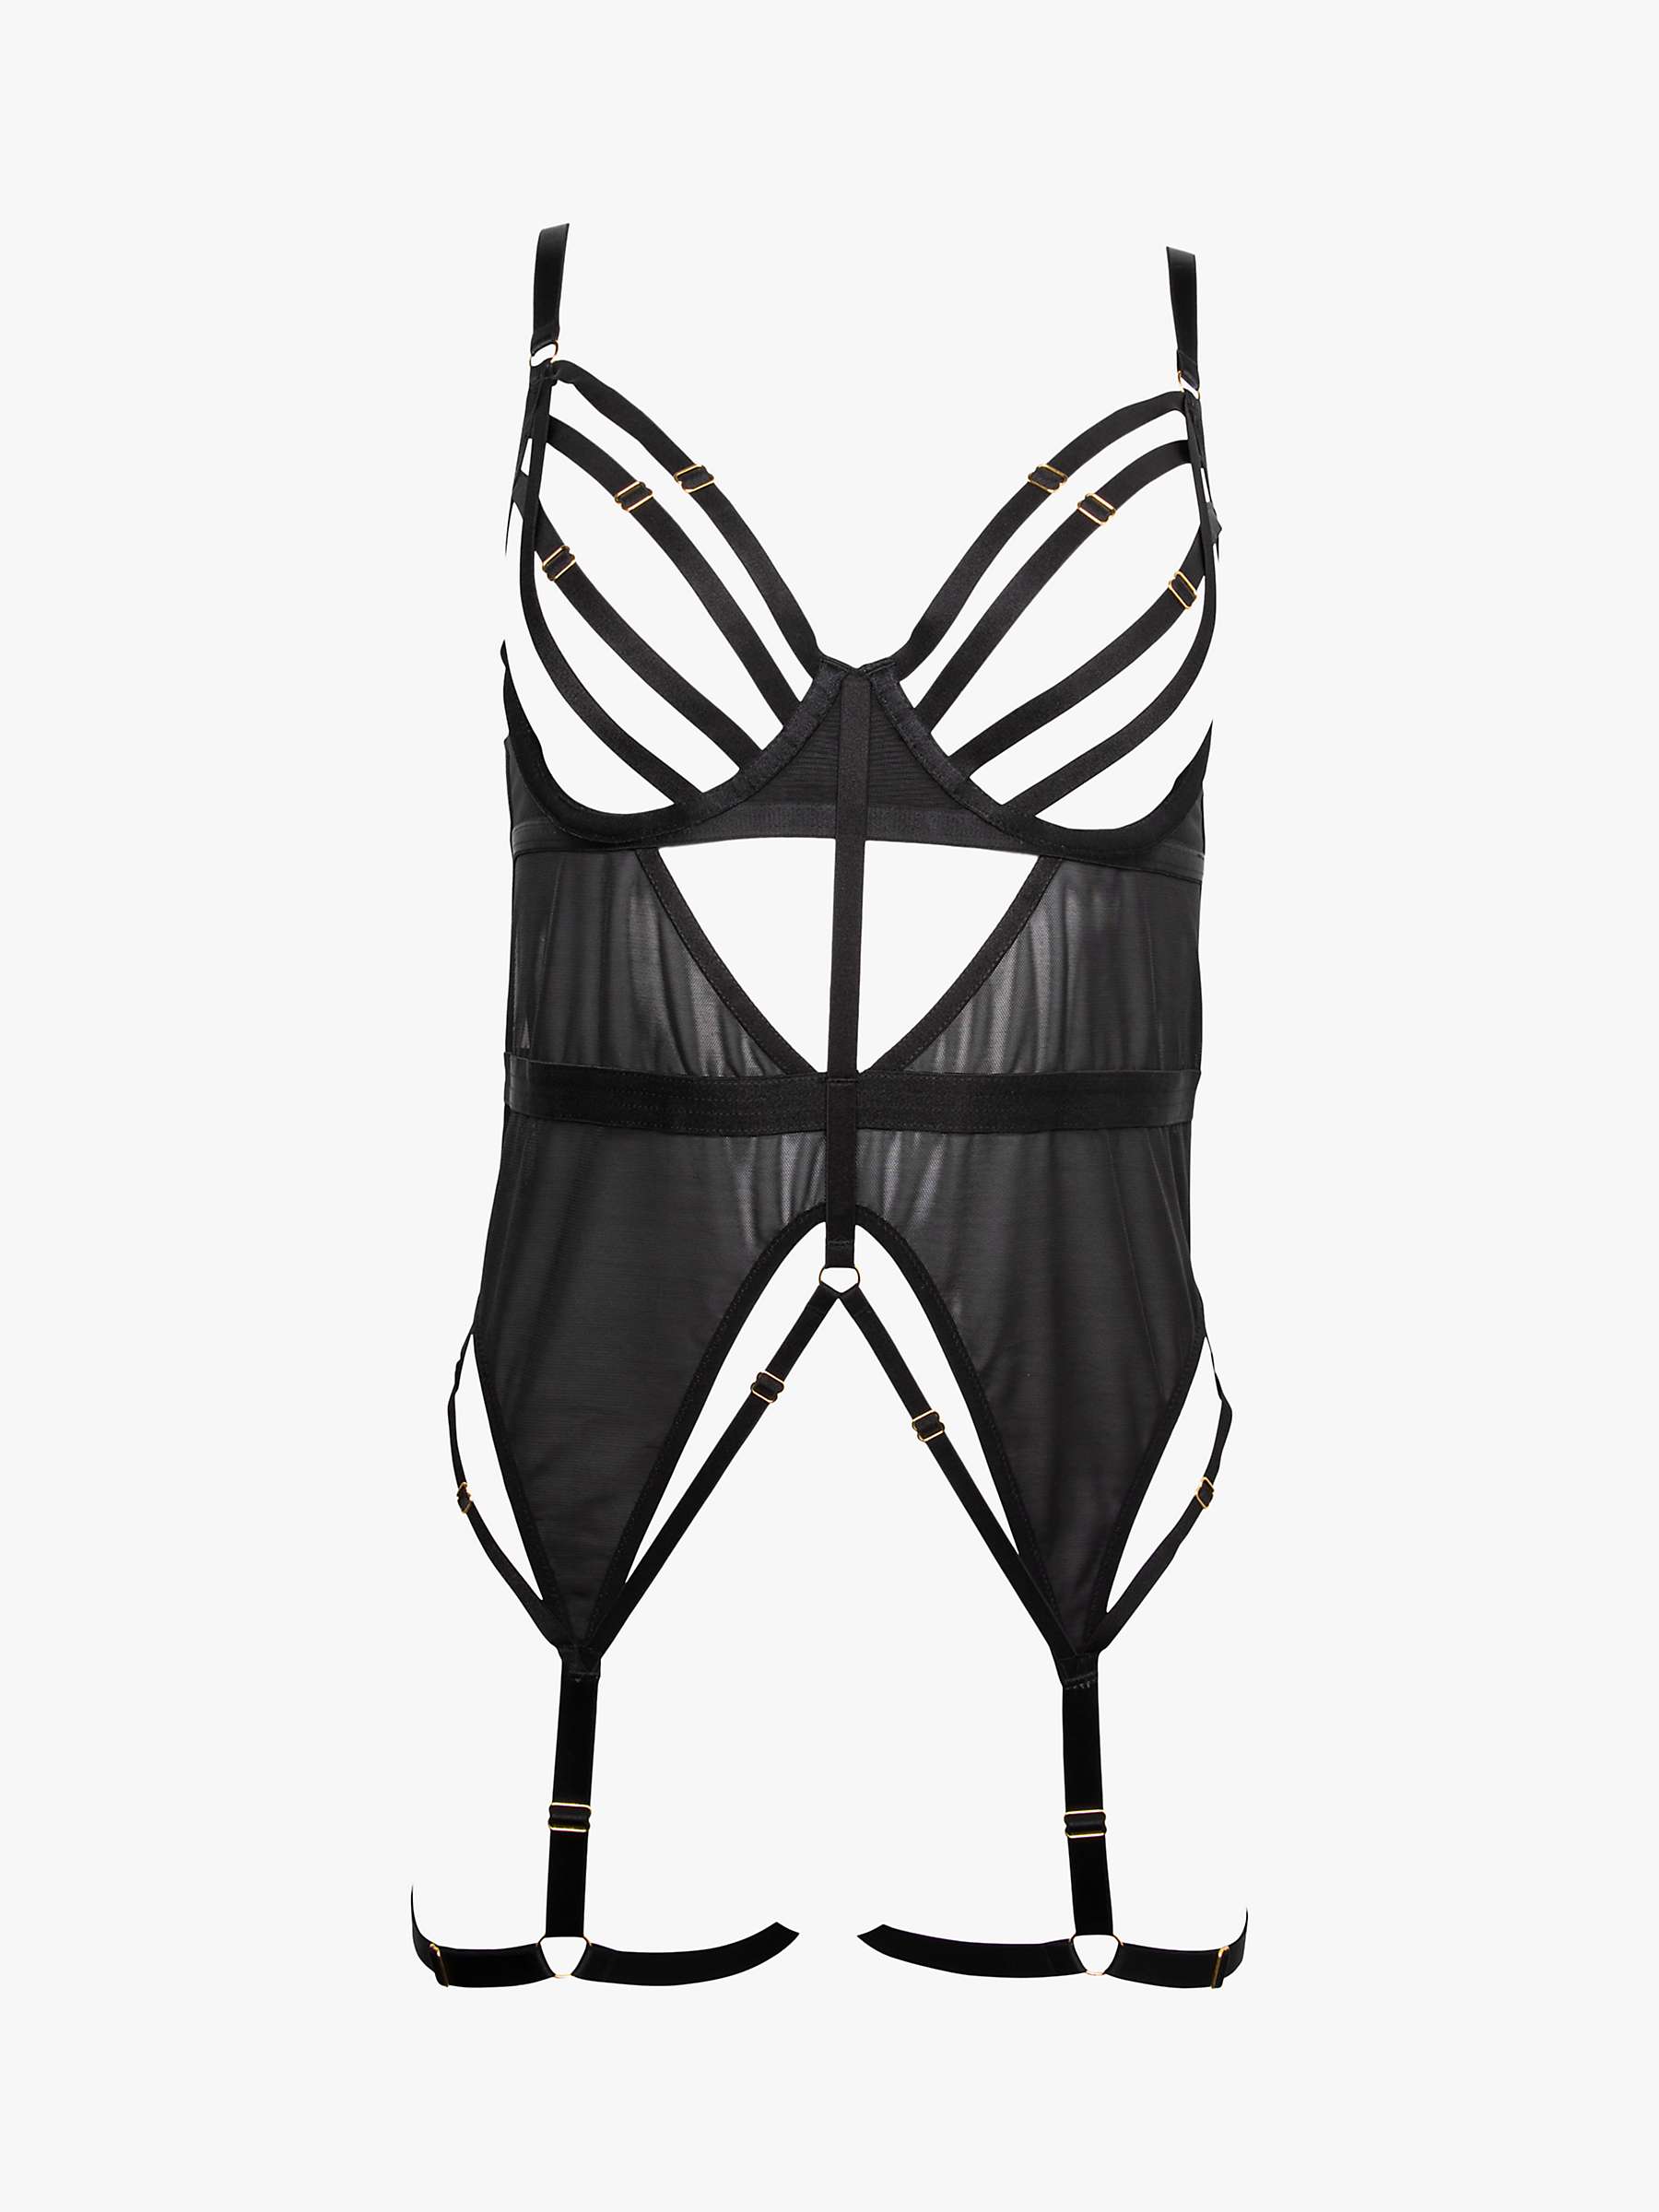 Buy Wolf & Whistle Chantal Wired Mesh Basque with Leg Harness, Black Online at johnlewis.com